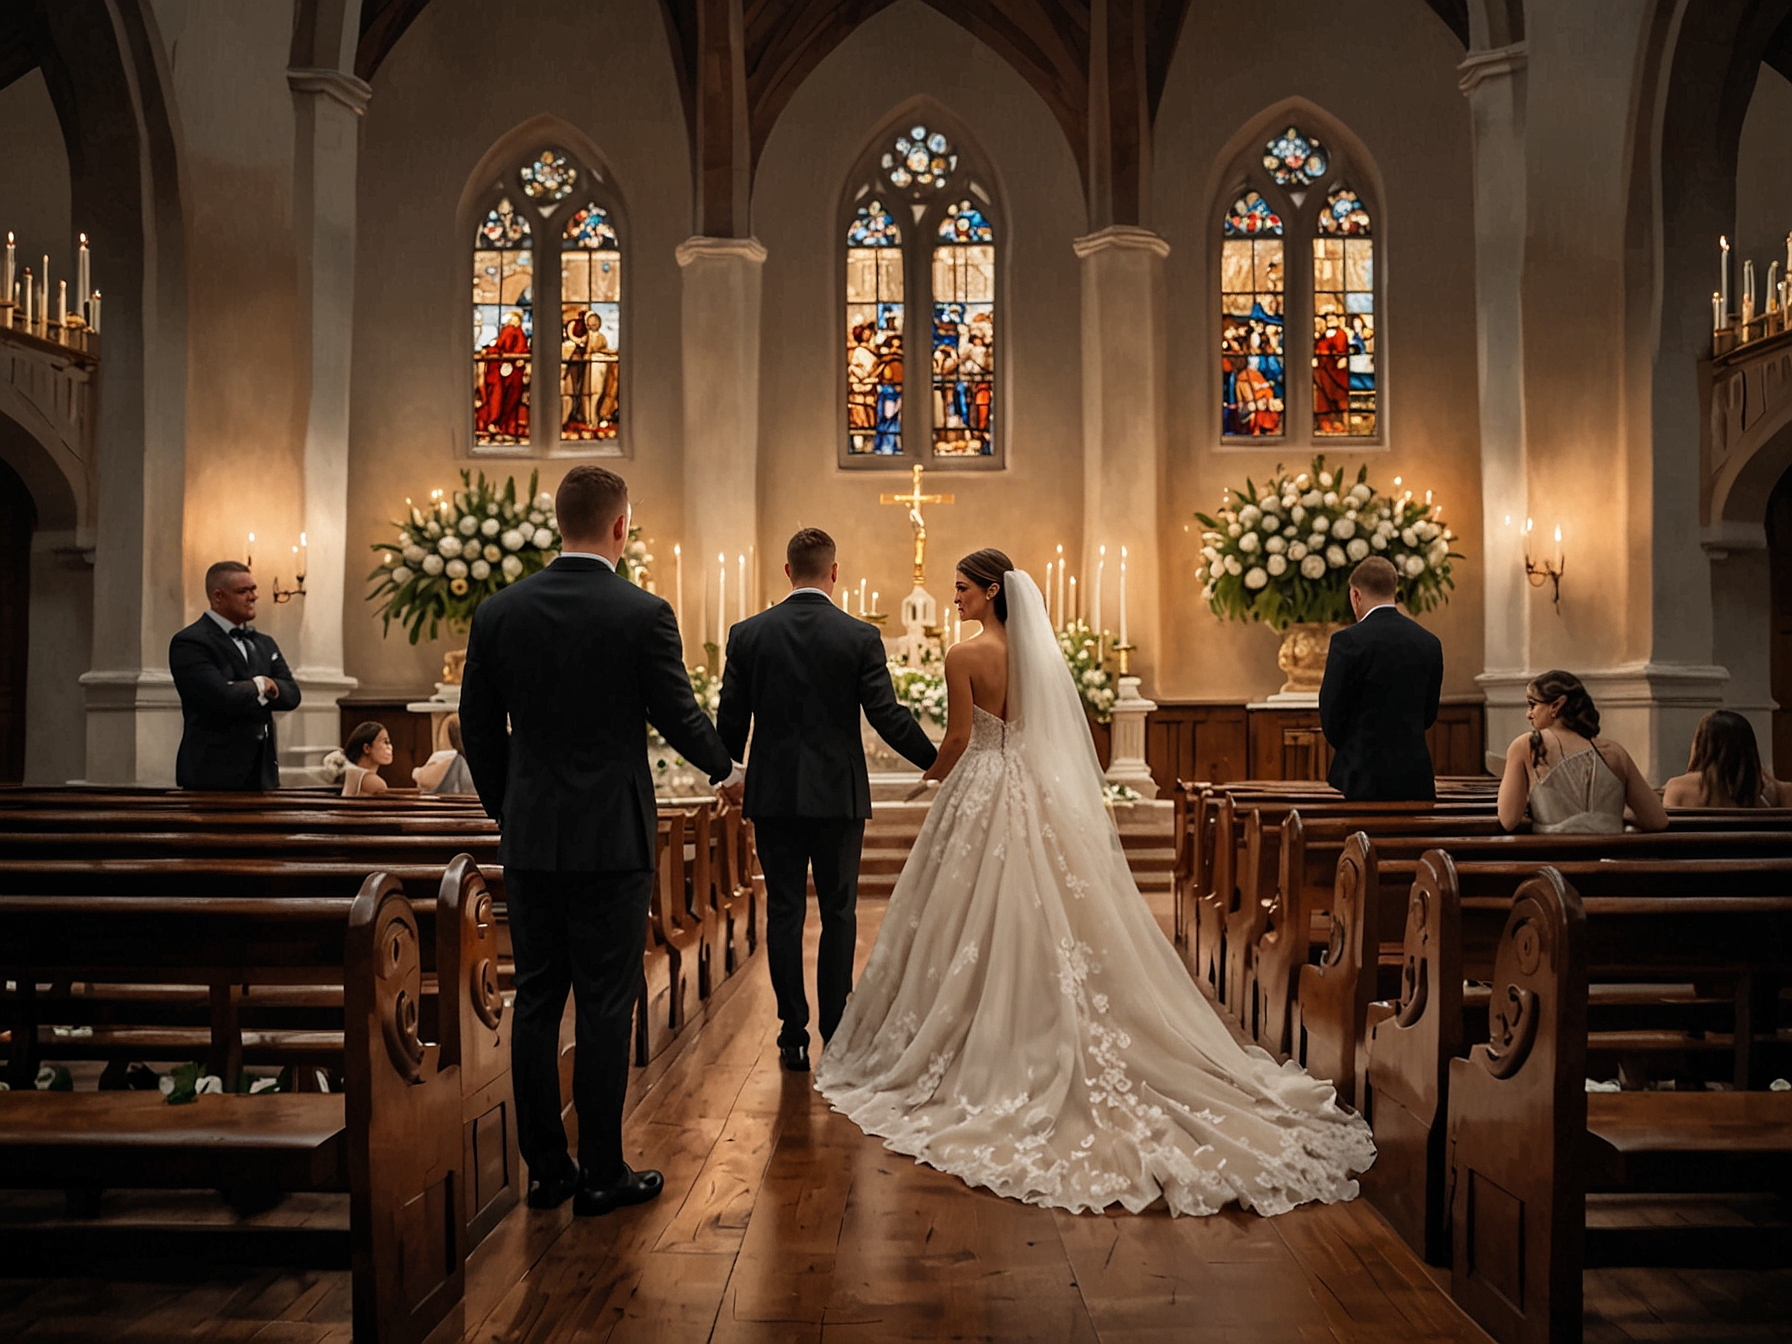 Olivia Culpo and Christian McCaffrey exchange heartfelt vows in a beautifully adorned church filled with flowers and candlelight, capturing the emotional moment of their union.